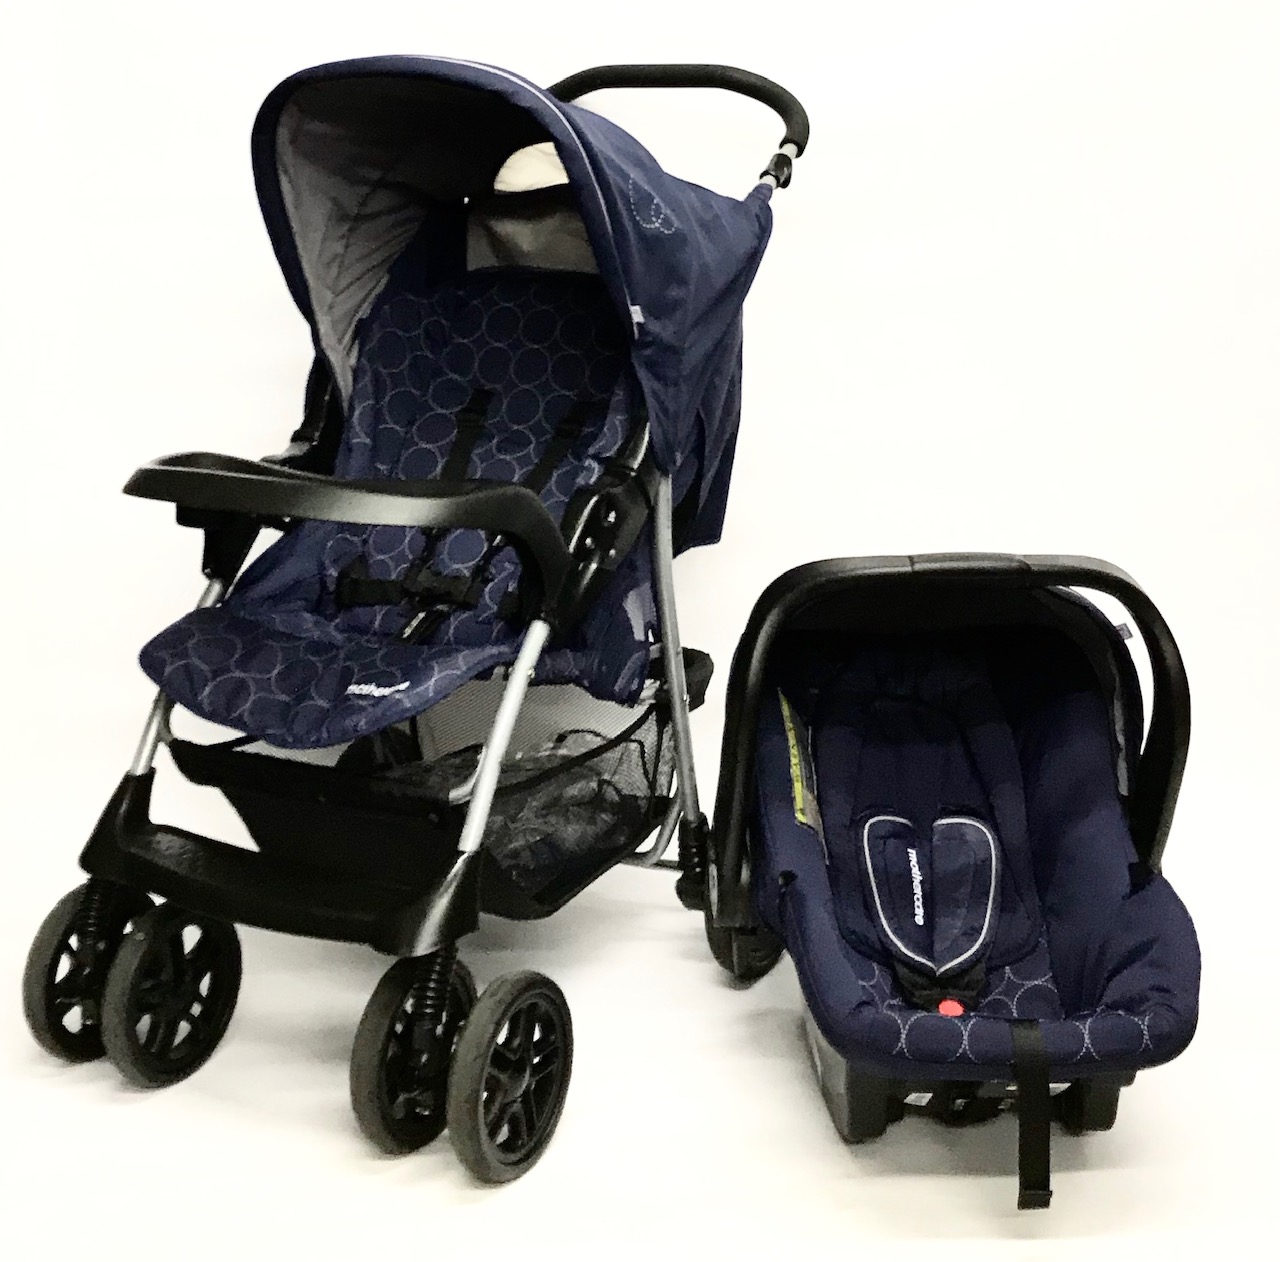 mothercare blue travel system